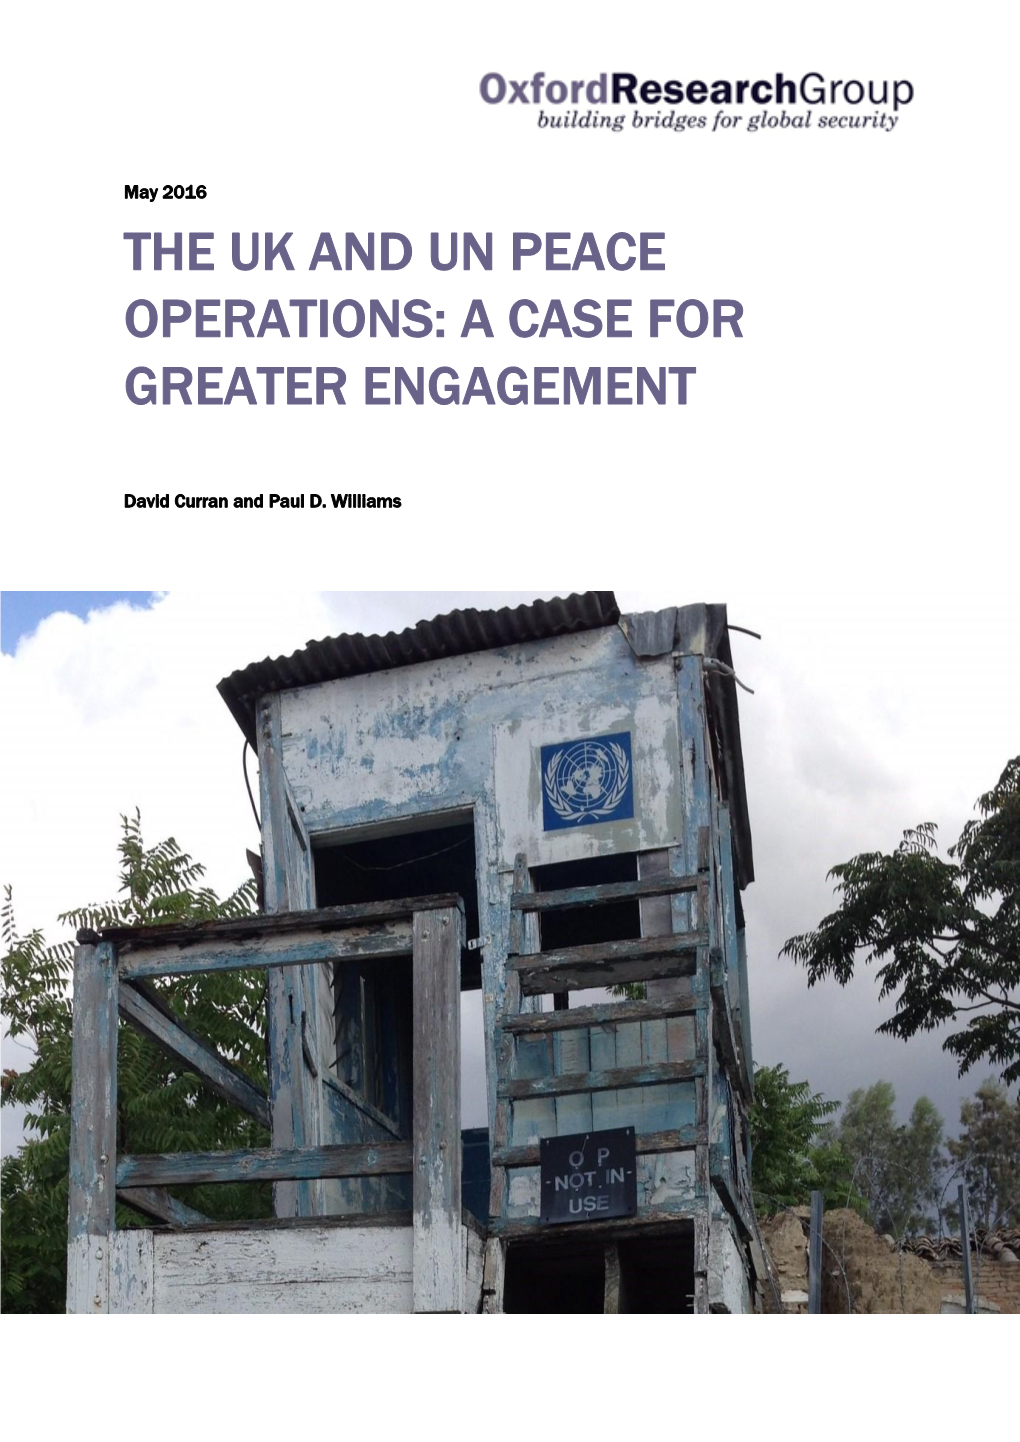 The Uk and Un Peace Operations: a Case for Greater Engagement